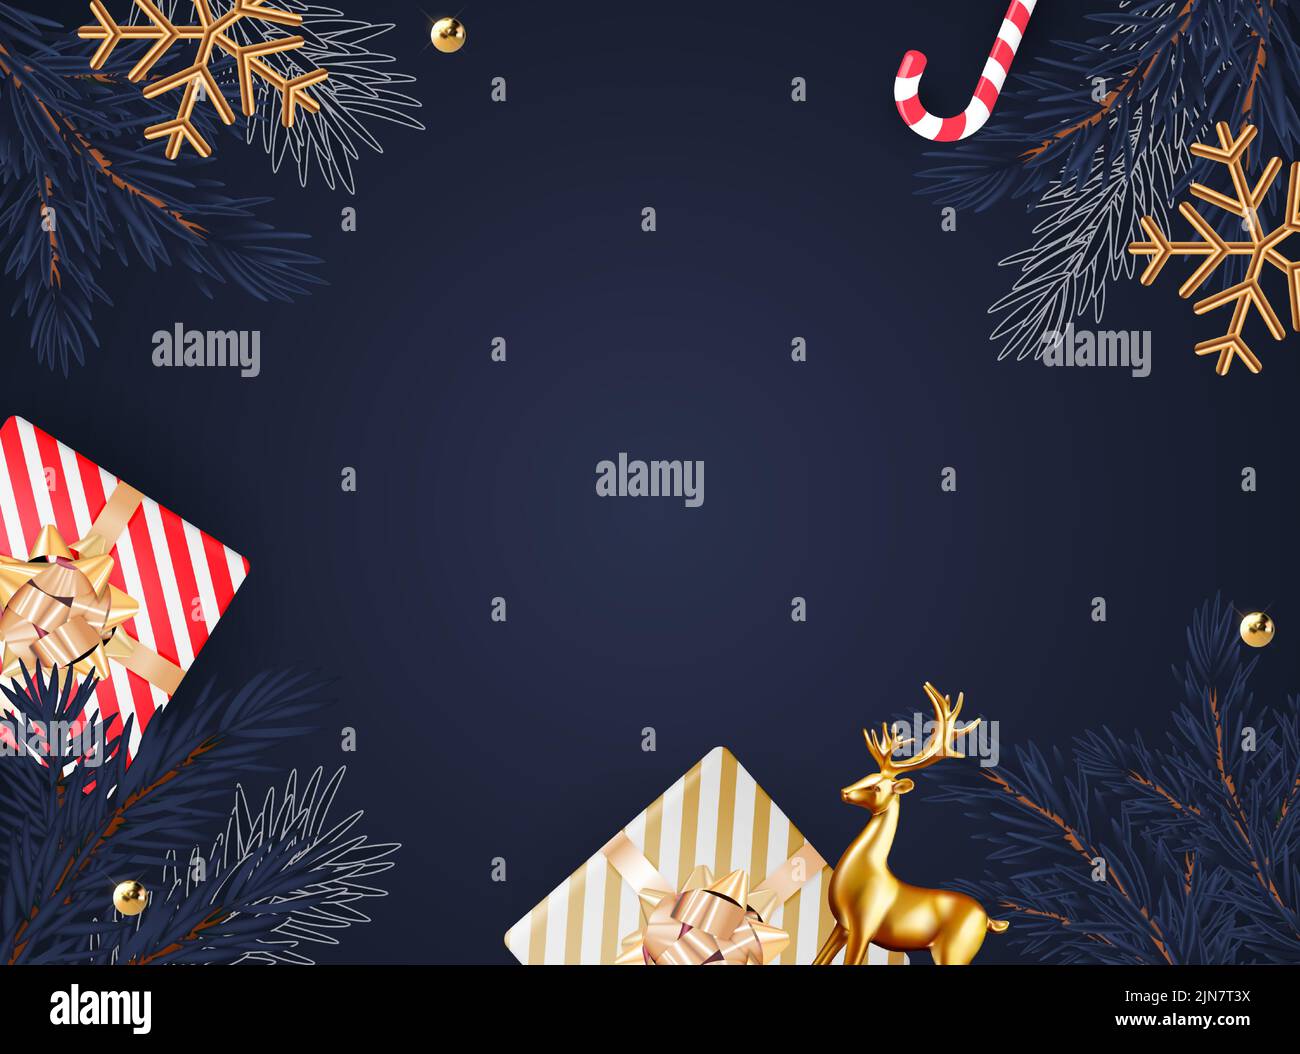 Merry Christmas and Happy New Year Greeting Card Stock Vector